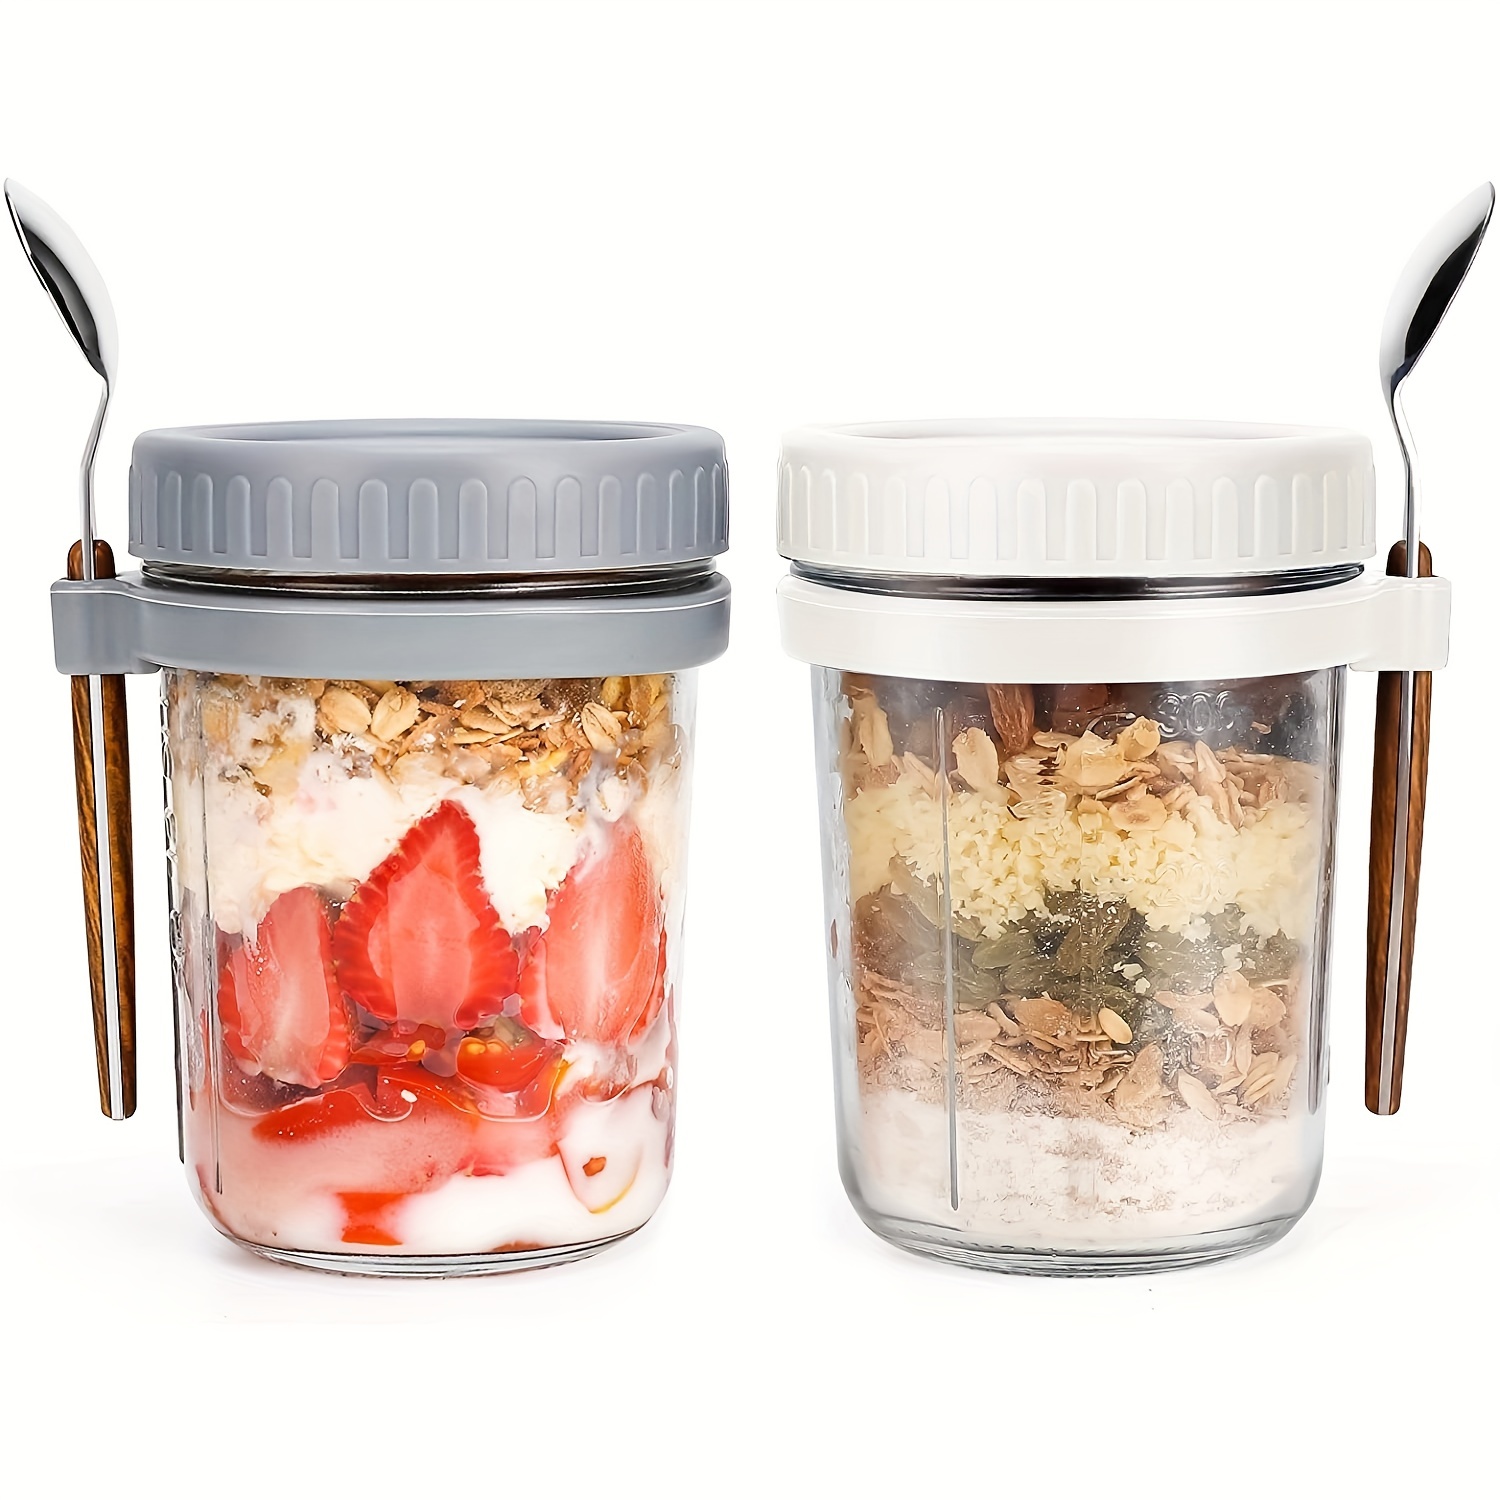 mveomtd Overnight Oats Jars Cereal Milk Container Leak Proof Oatmeal Jars  Yogurt Containers With Lids Oatmeal To Go Container Winter Mug Coffee Cup